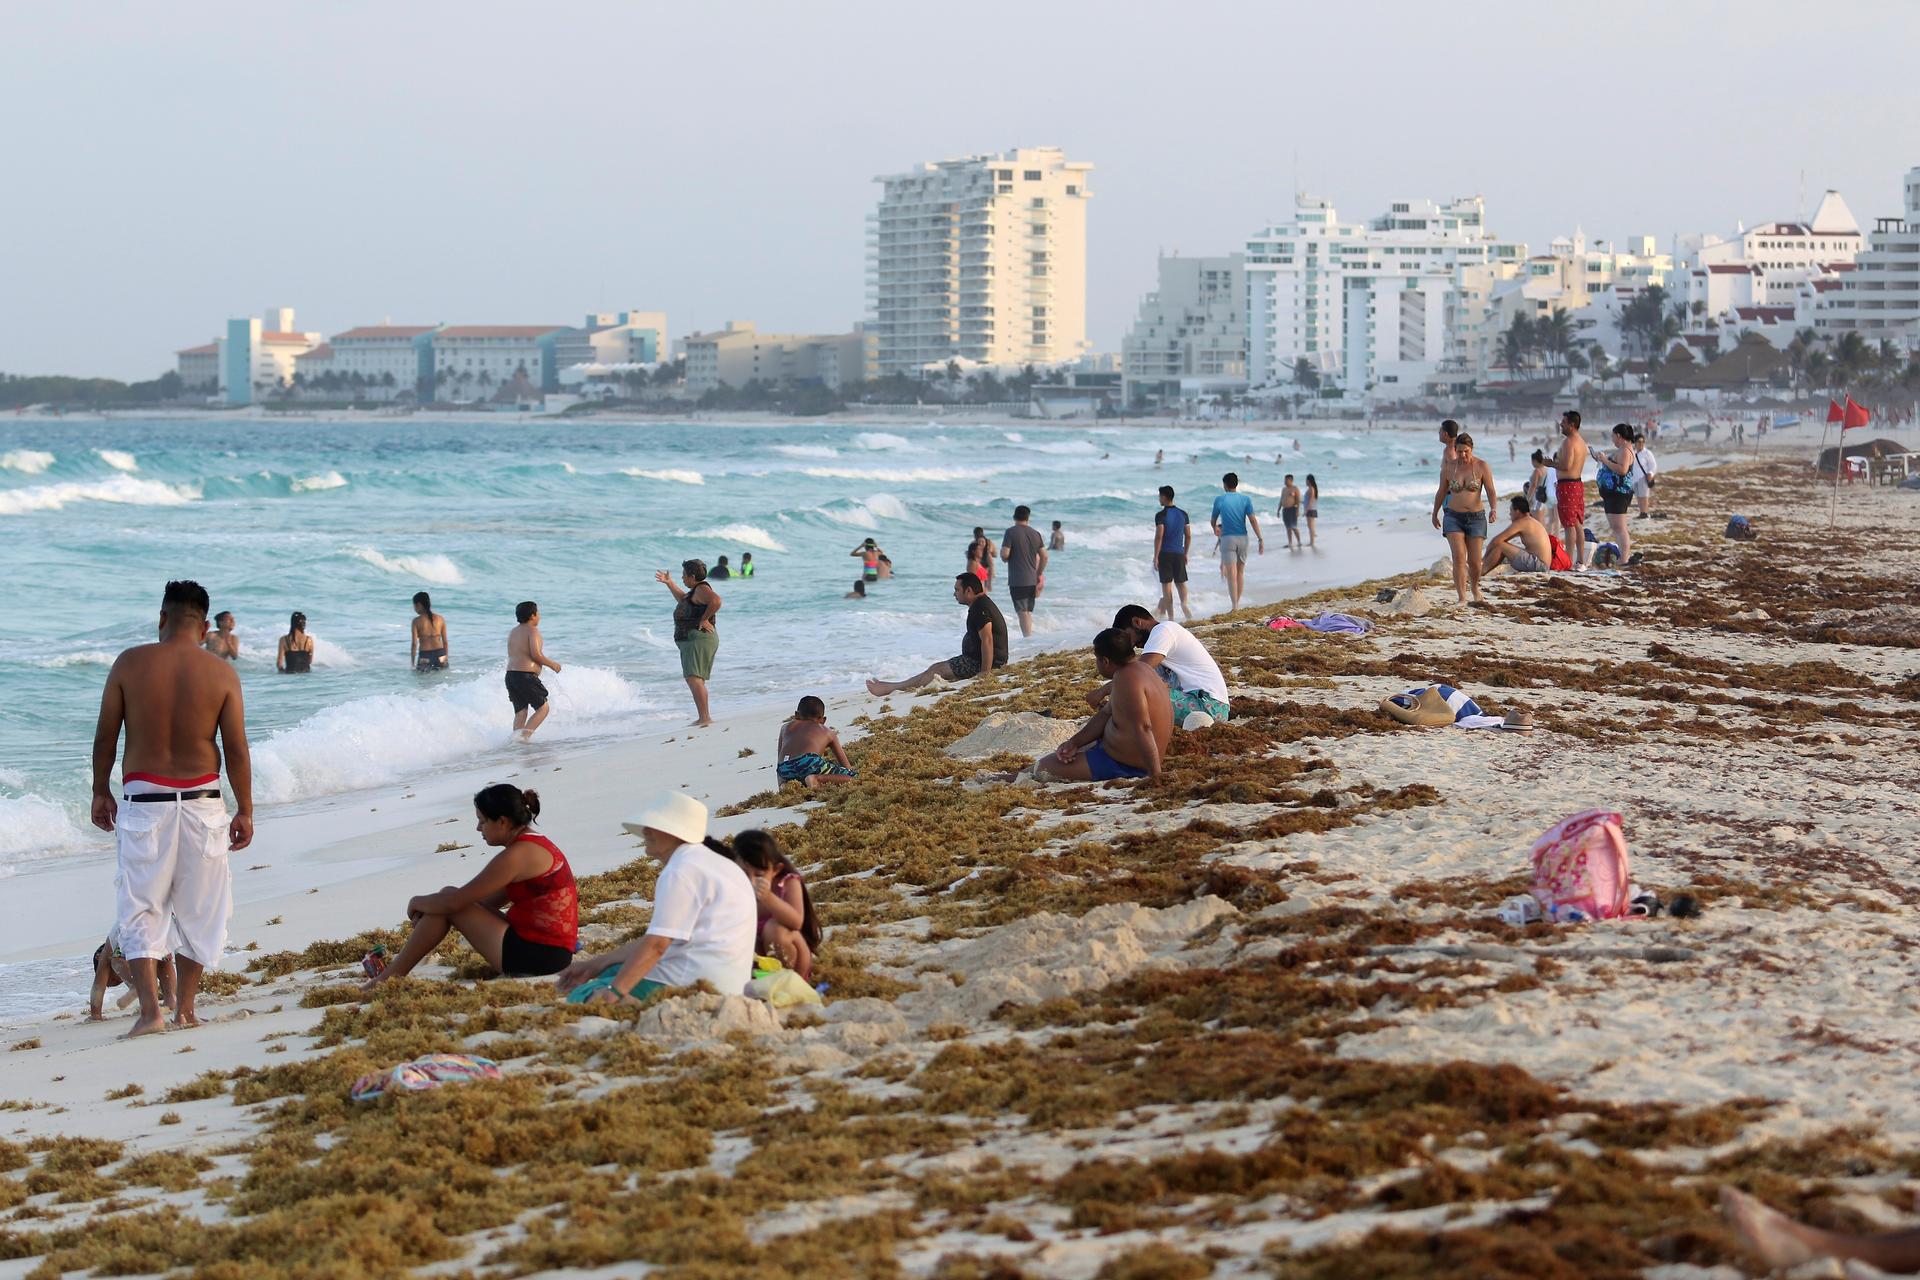 Tourists are seen on a beach covered with seaweed in Cancun.